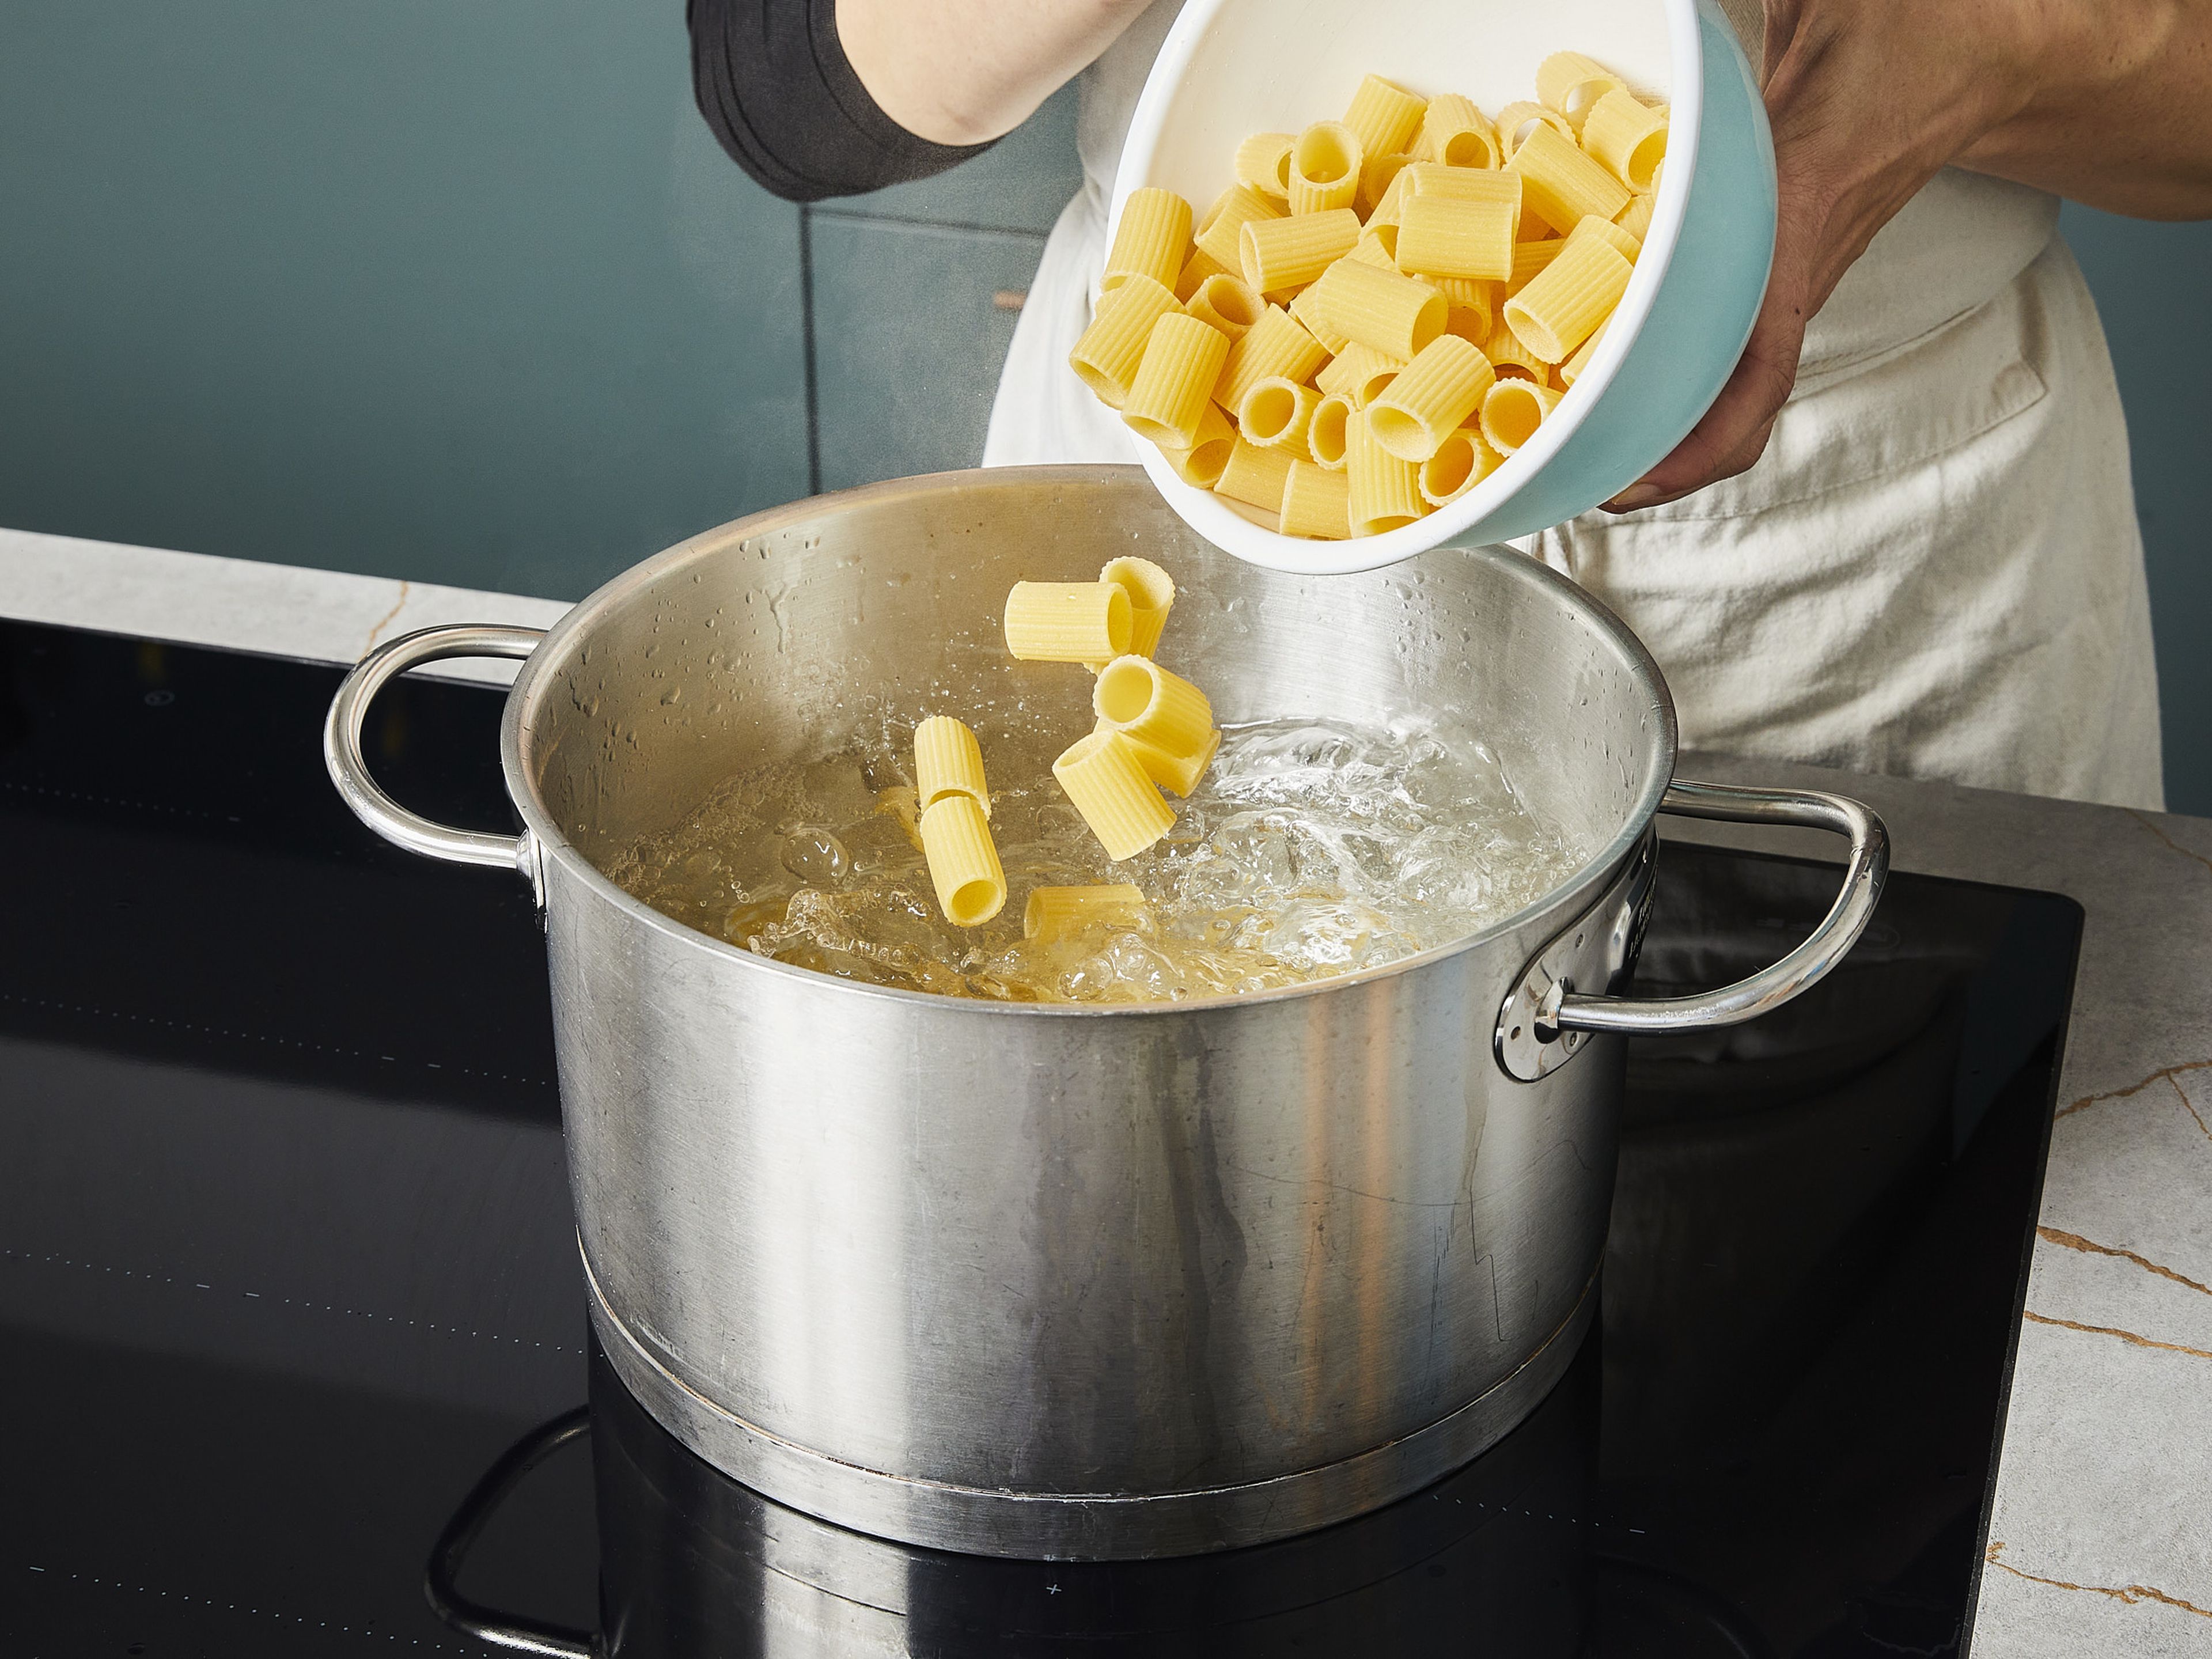 Cook the pasta in a large pot of salted water according to package instructions until al dente. Meanwhile, continue with the recipe. Once pasta is al dente, reserve some pasta water (approx. 200 ml/1 cup), then drain pasta in a colander and set aside.